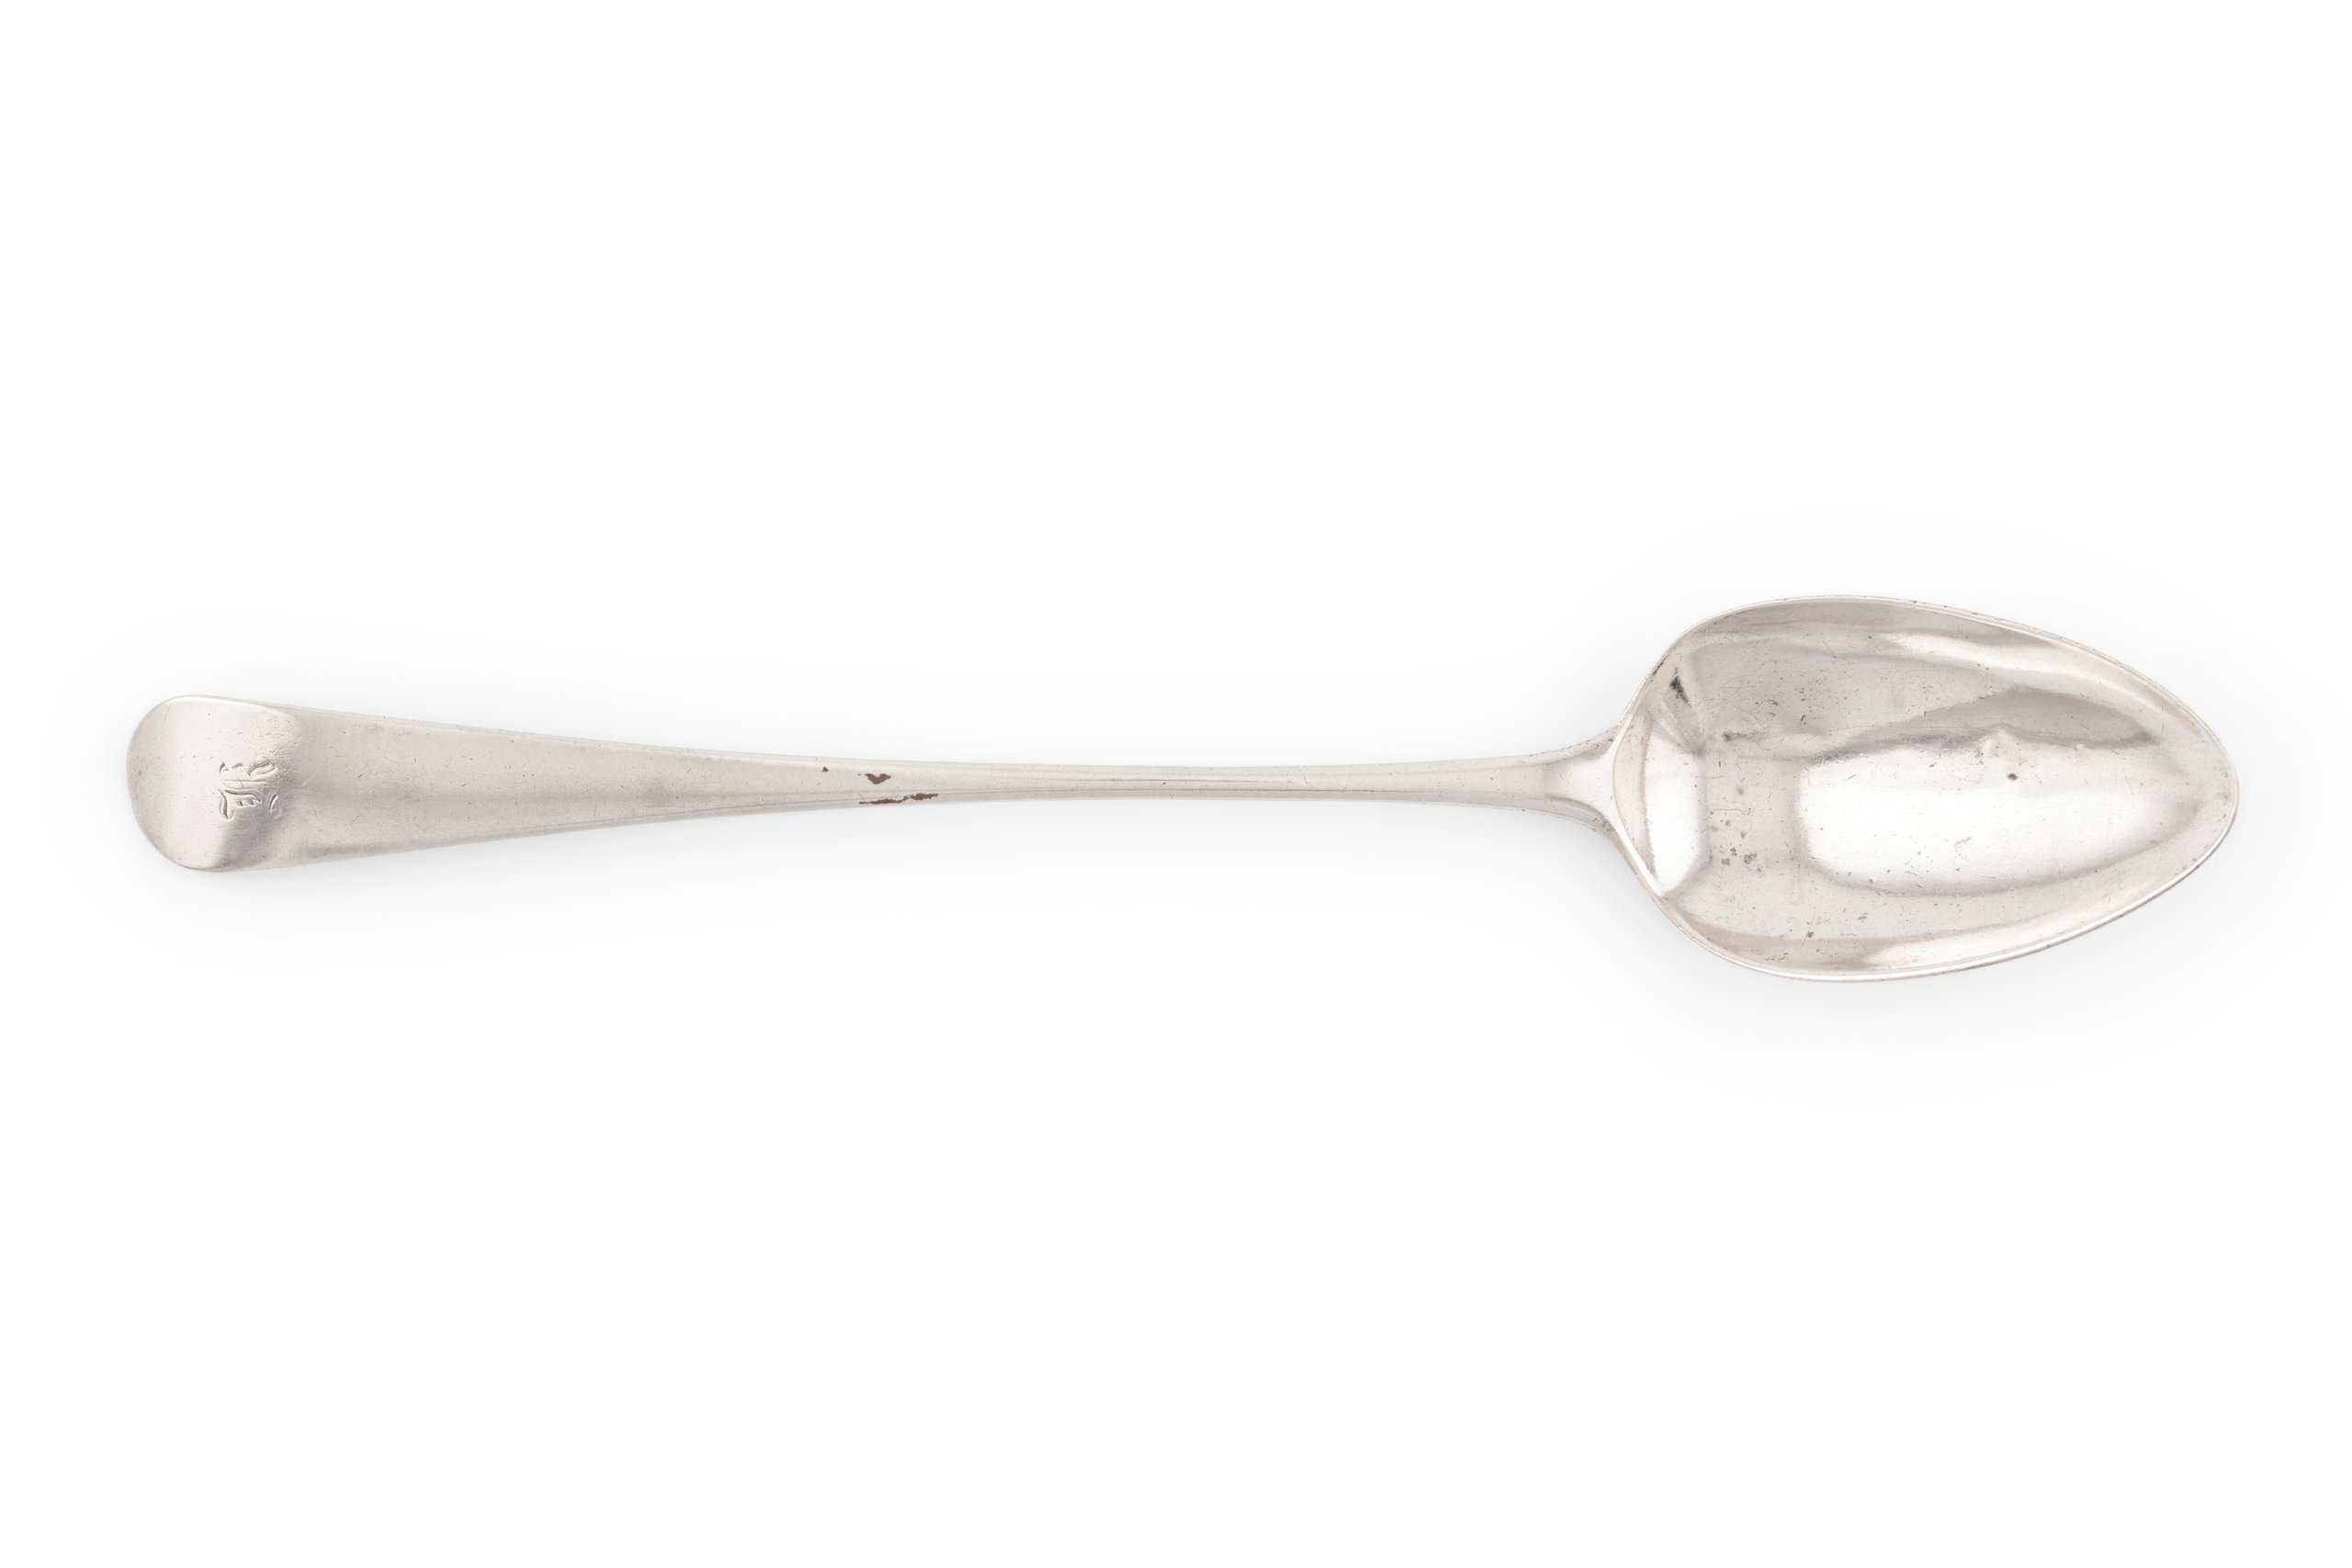 Sterling silver basting spoon